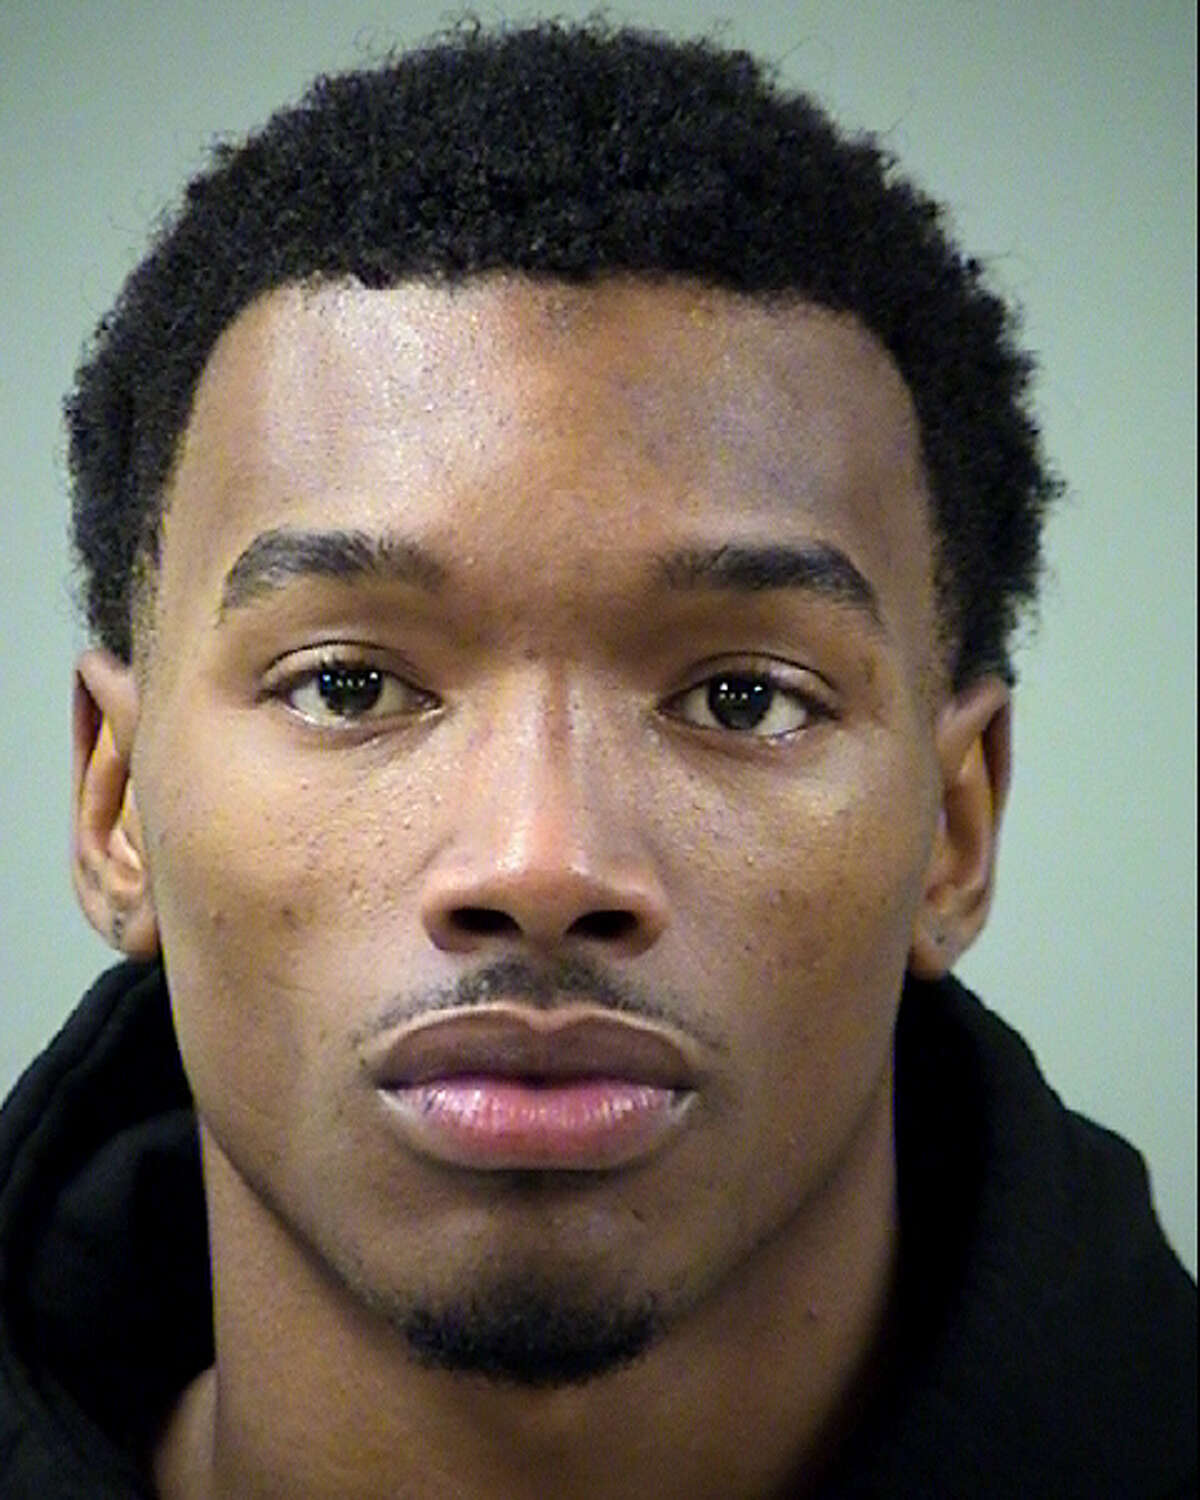 Christian Wilson was arrested Monday on a charge of possession of marijuana, according to the Bexar County Sheriff's Office.